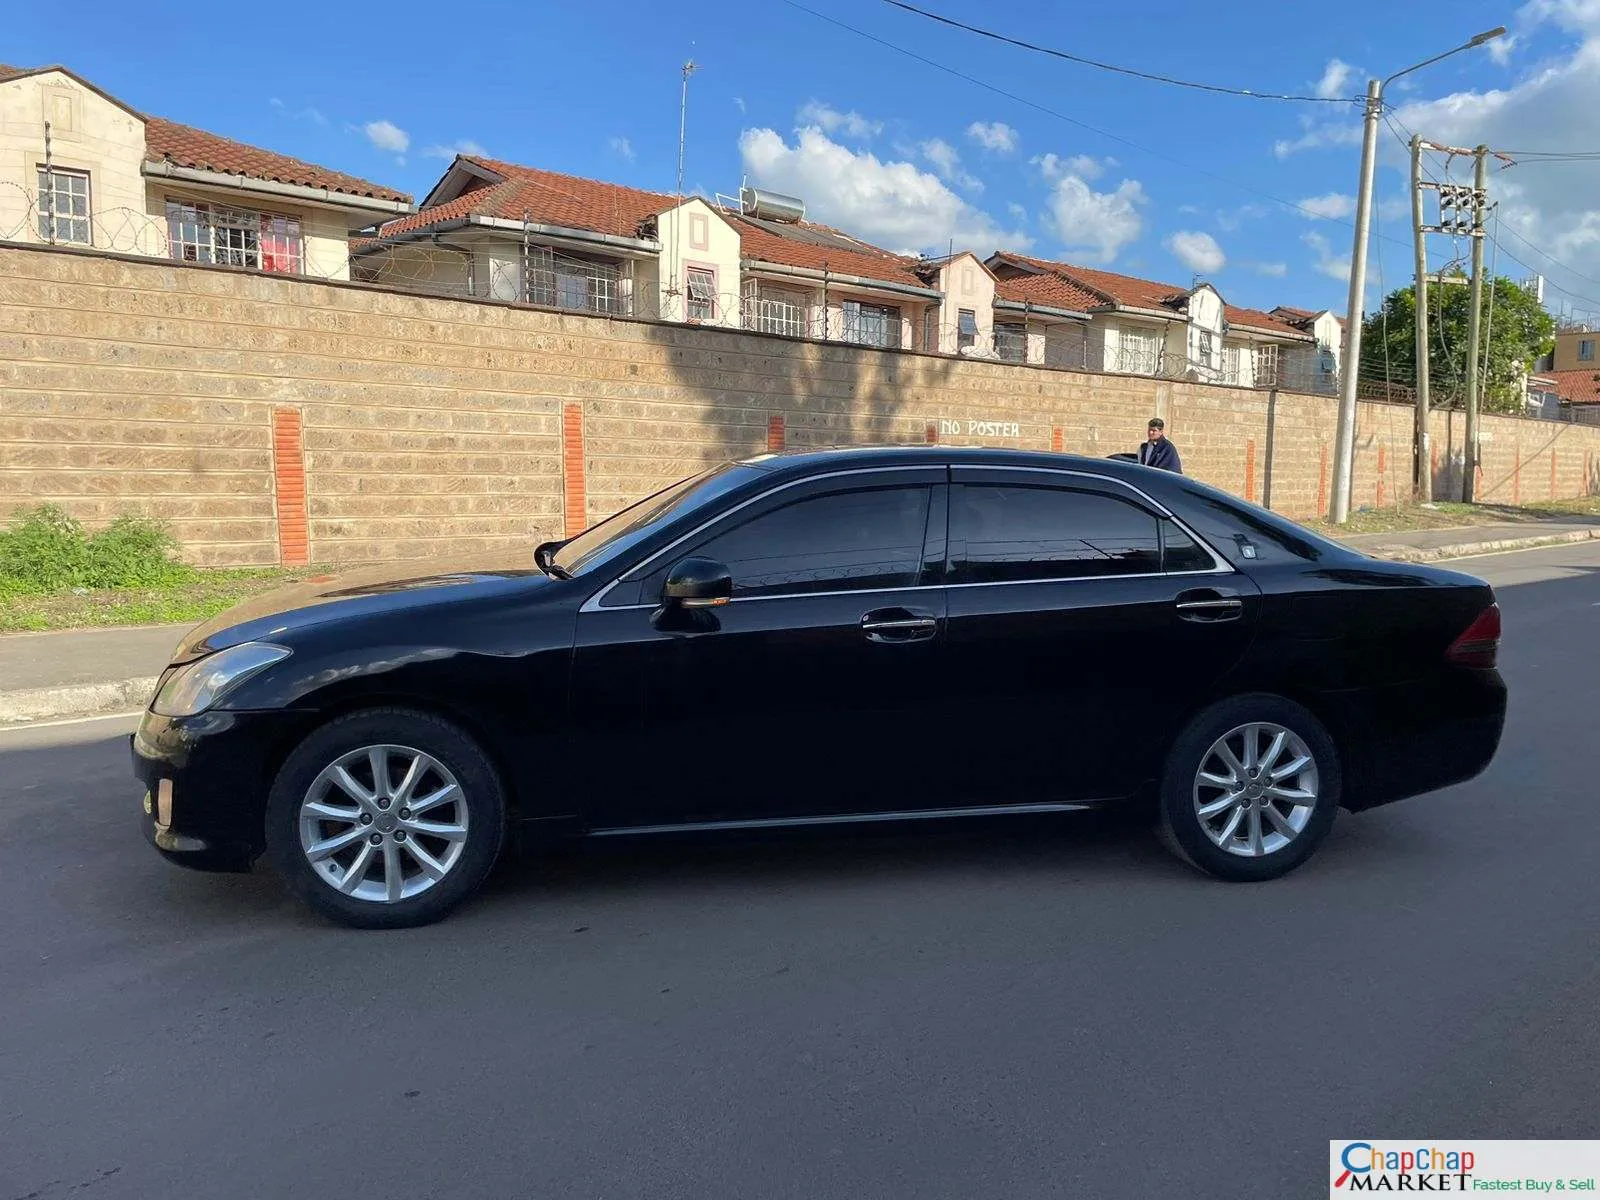 Cars Cars For Sale/Vehicles-Toyota CROWN Royal Saloon 🔥🔥 You pay 30% Deposit Trade in Ok EXCLUSIVE 9